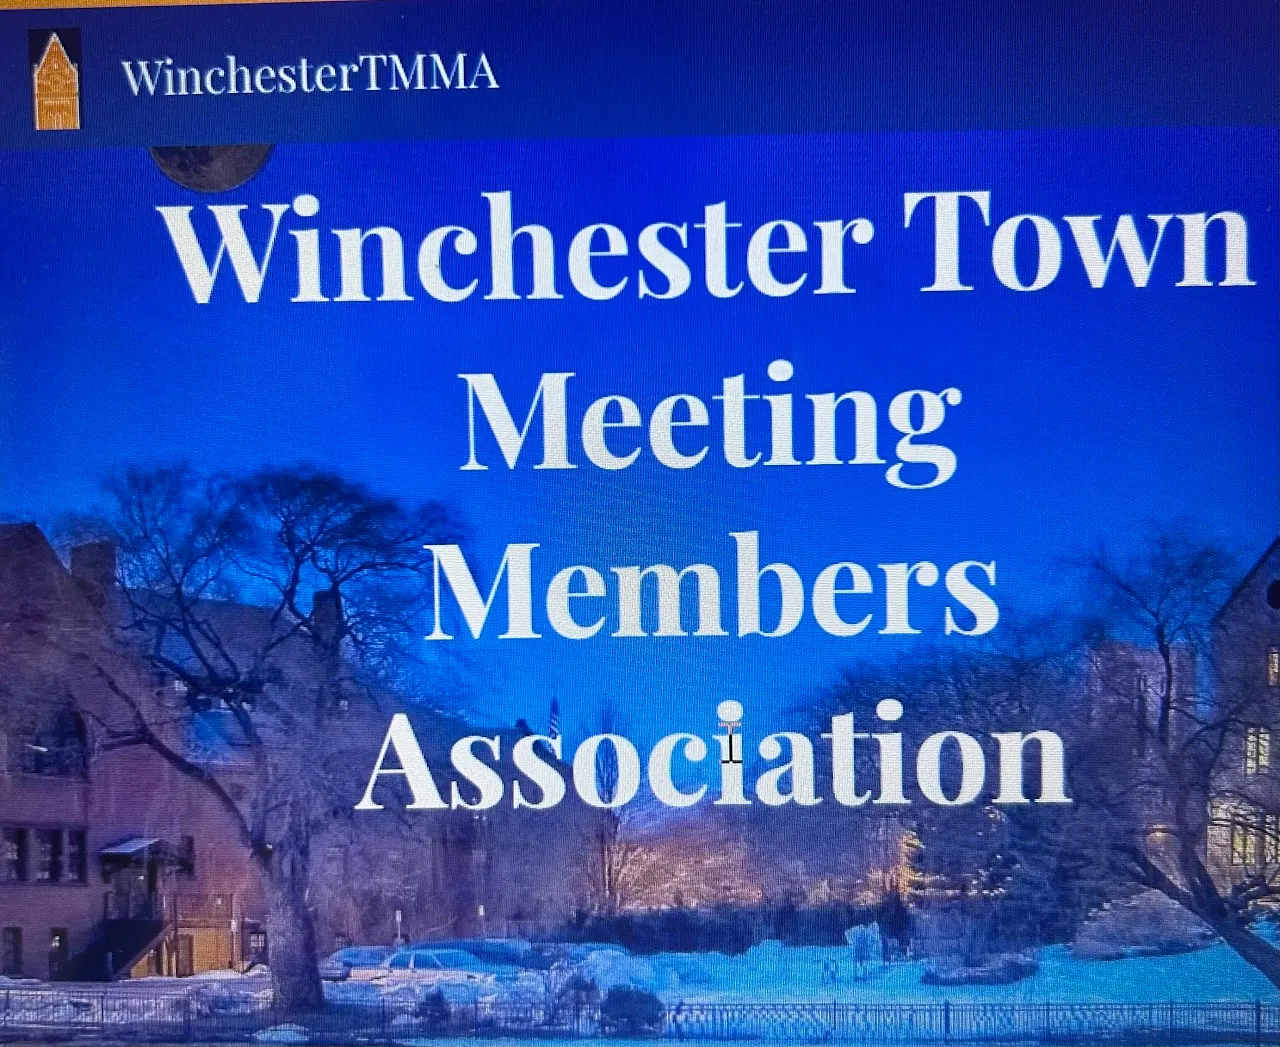 Town Meeting Members Assoc. up and running